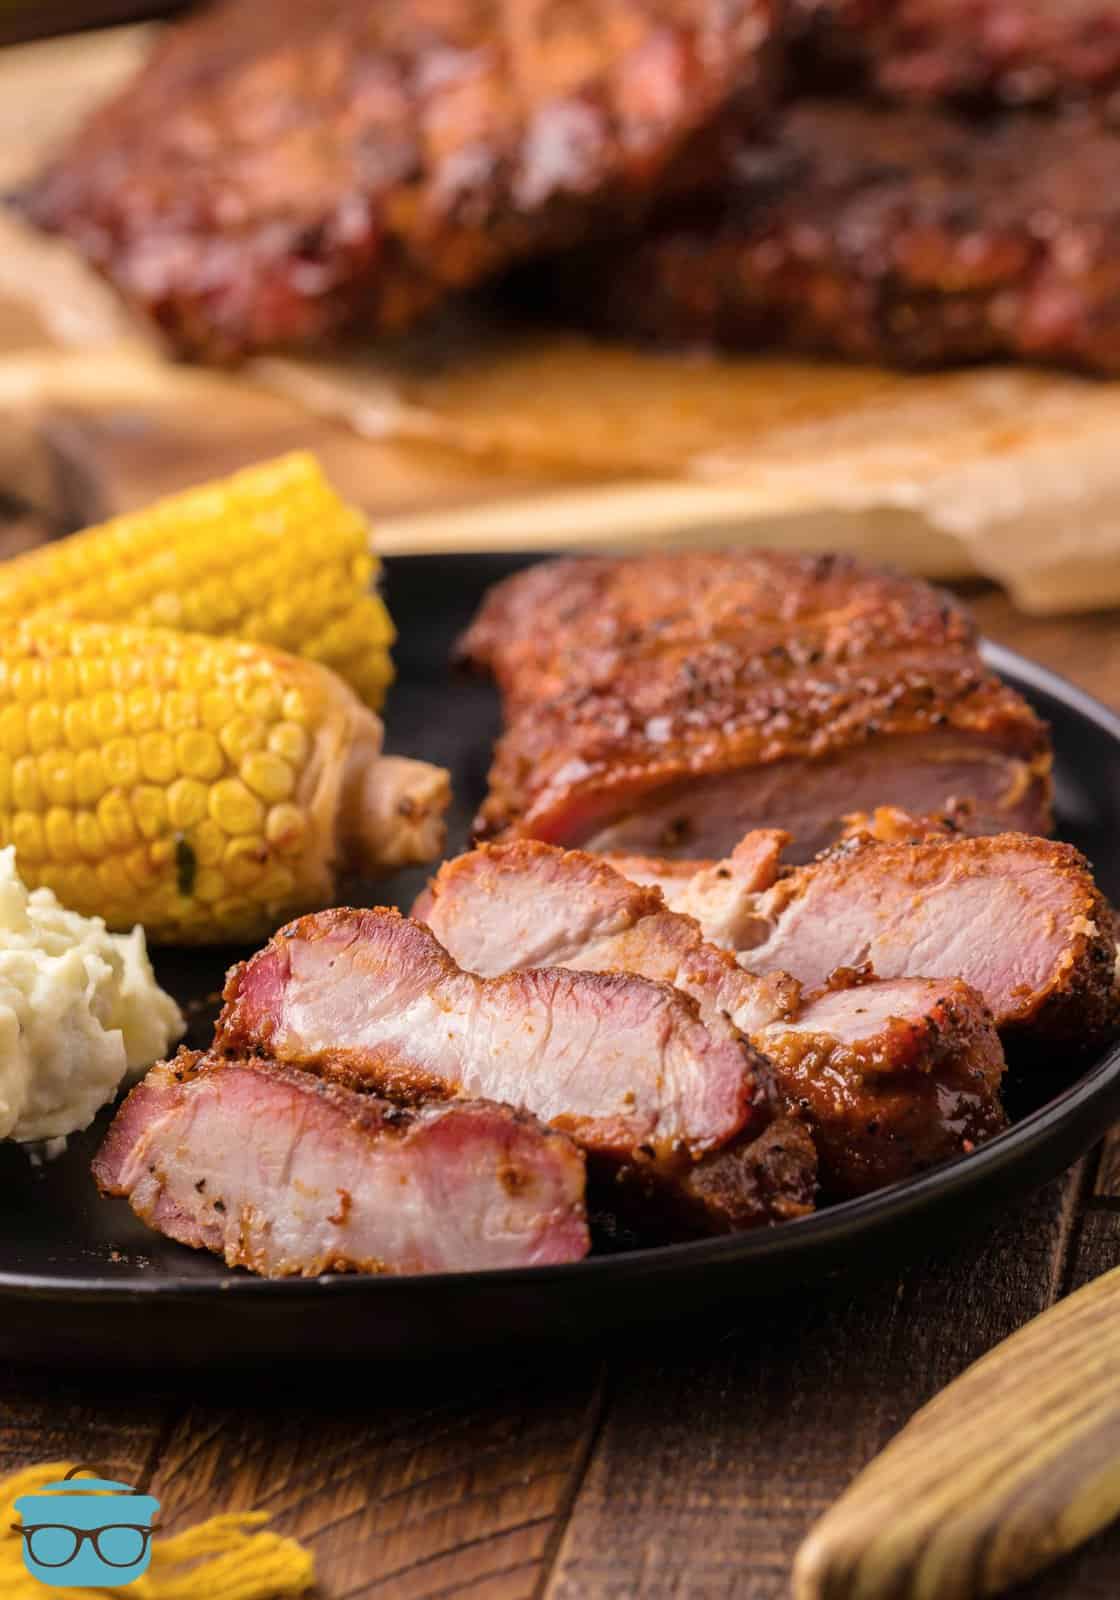 Sliced up Smoked Pork Steaks on plate with corn on the cob.